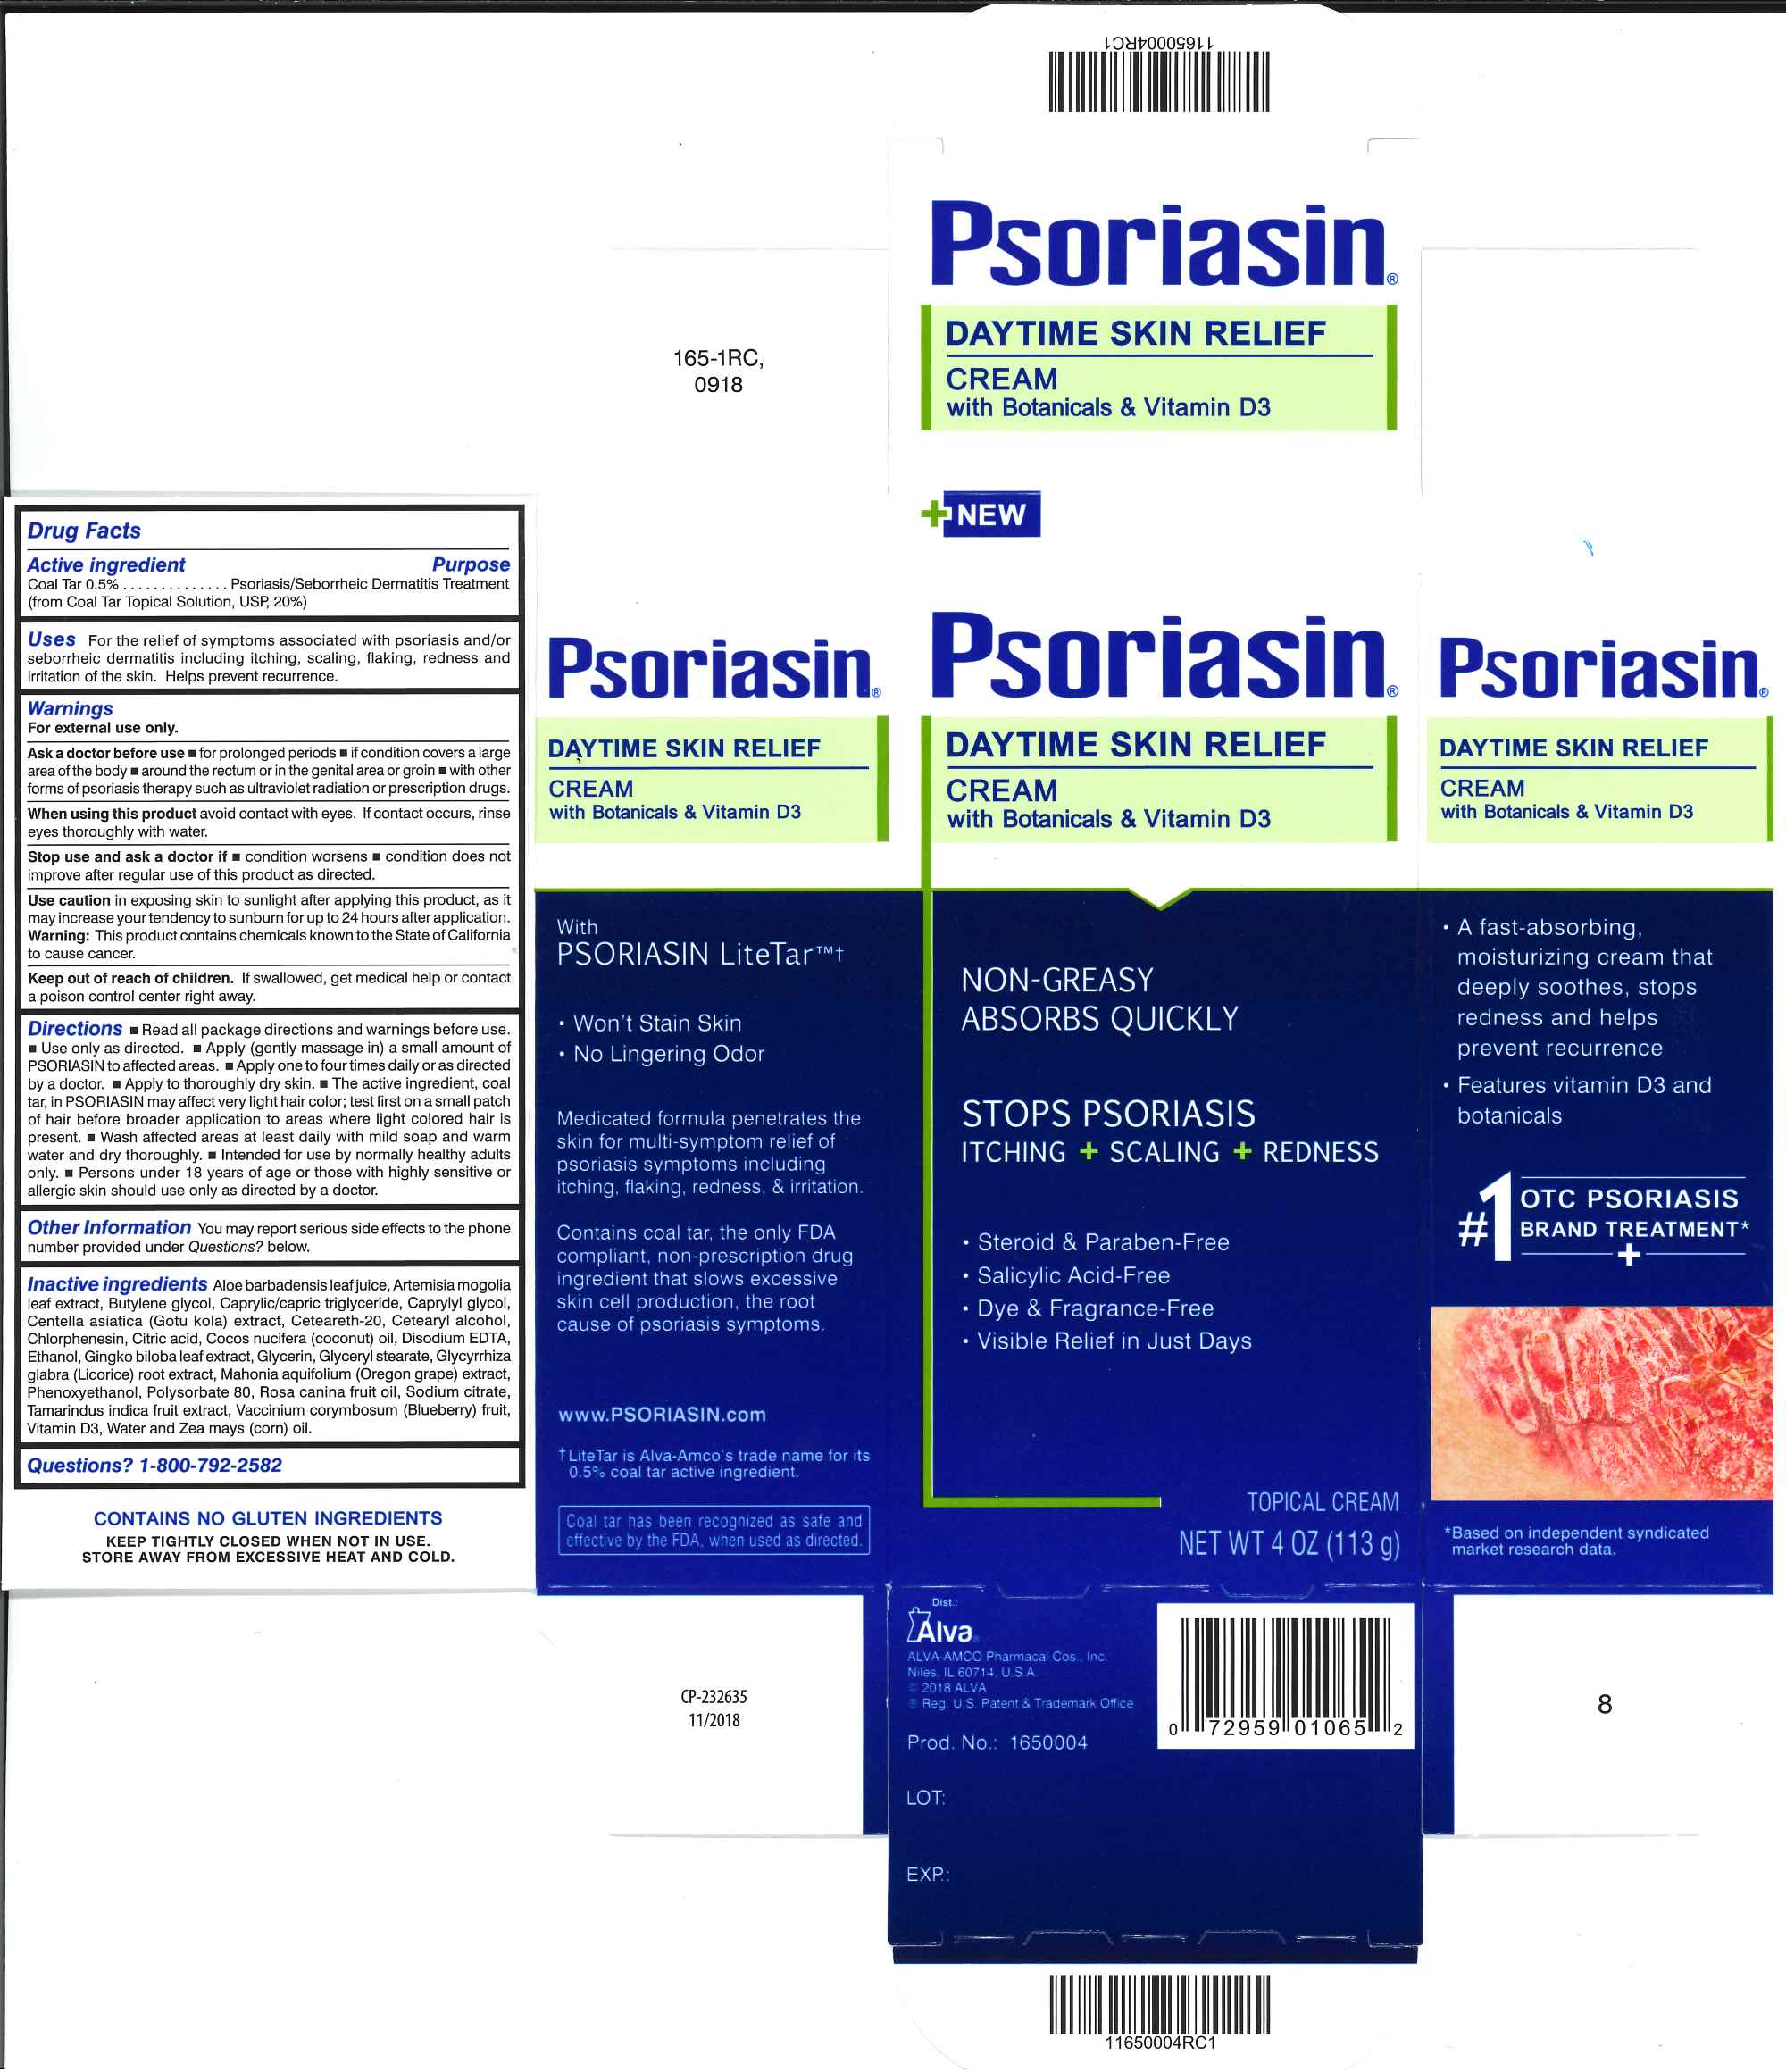 Psoriasin Daytime Skin Relief PDP